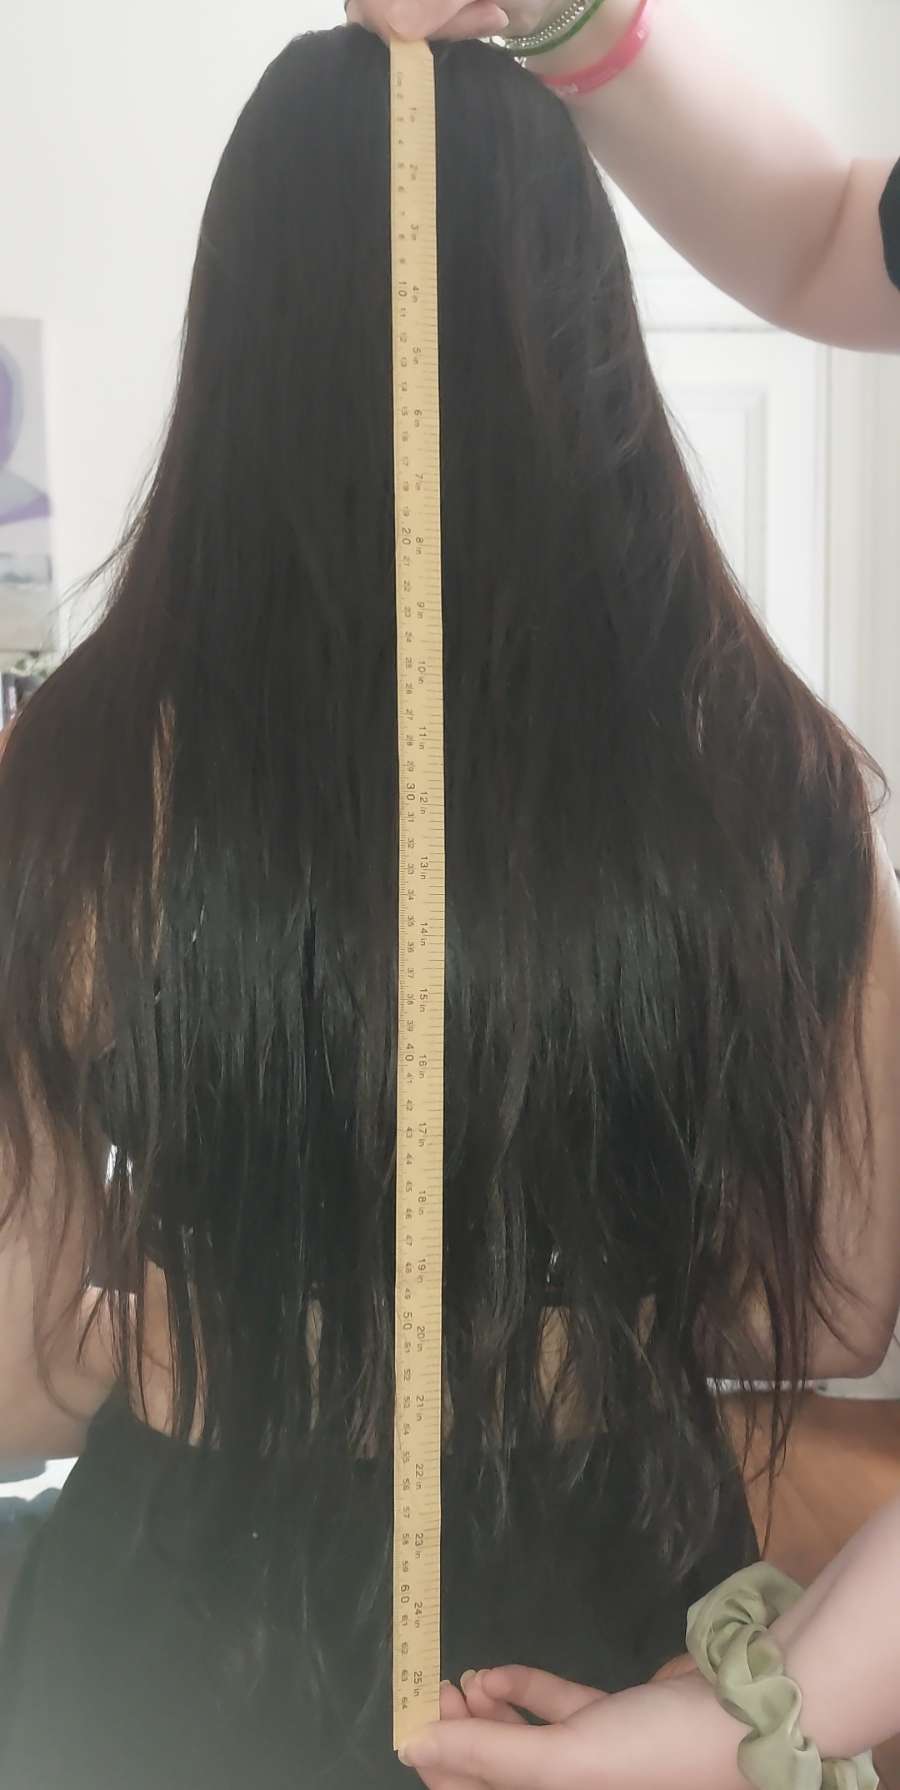 Abigail cut off 60cms of hair for charity. 